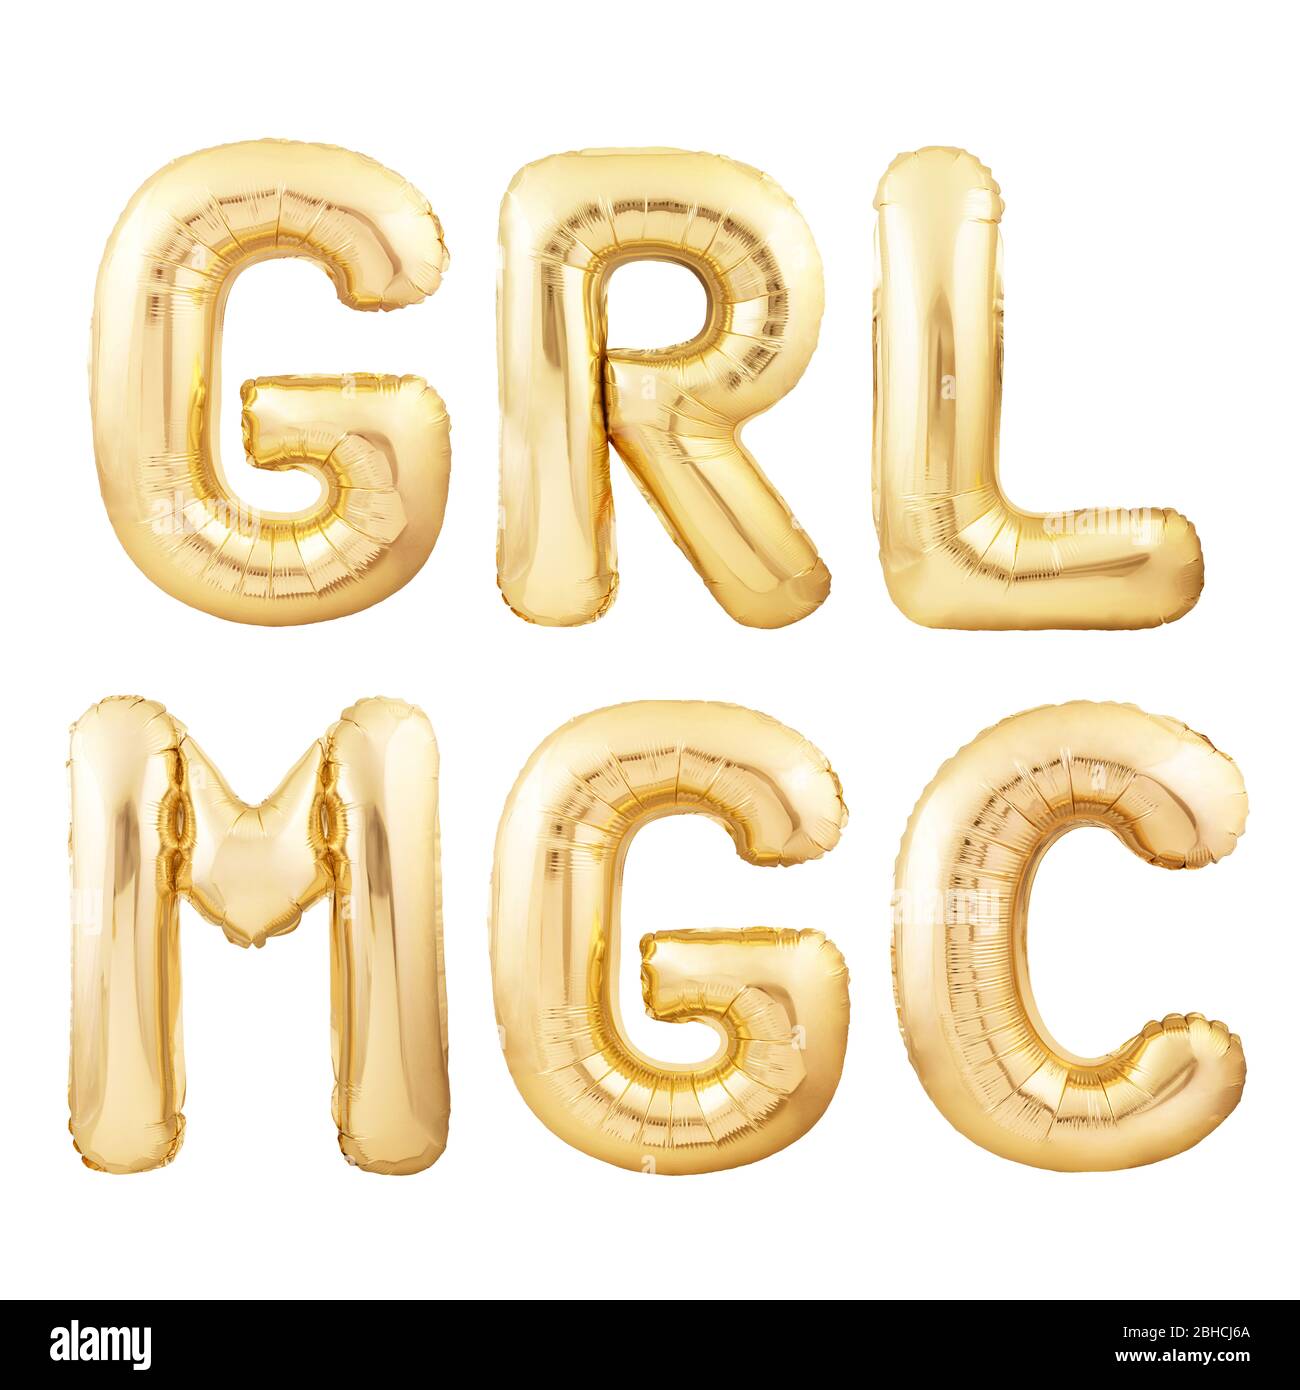 GRL MGC abbreviation for GIRL MAGIC abstract quote made of golden inflatable balloons isolated on white background Stock Photo